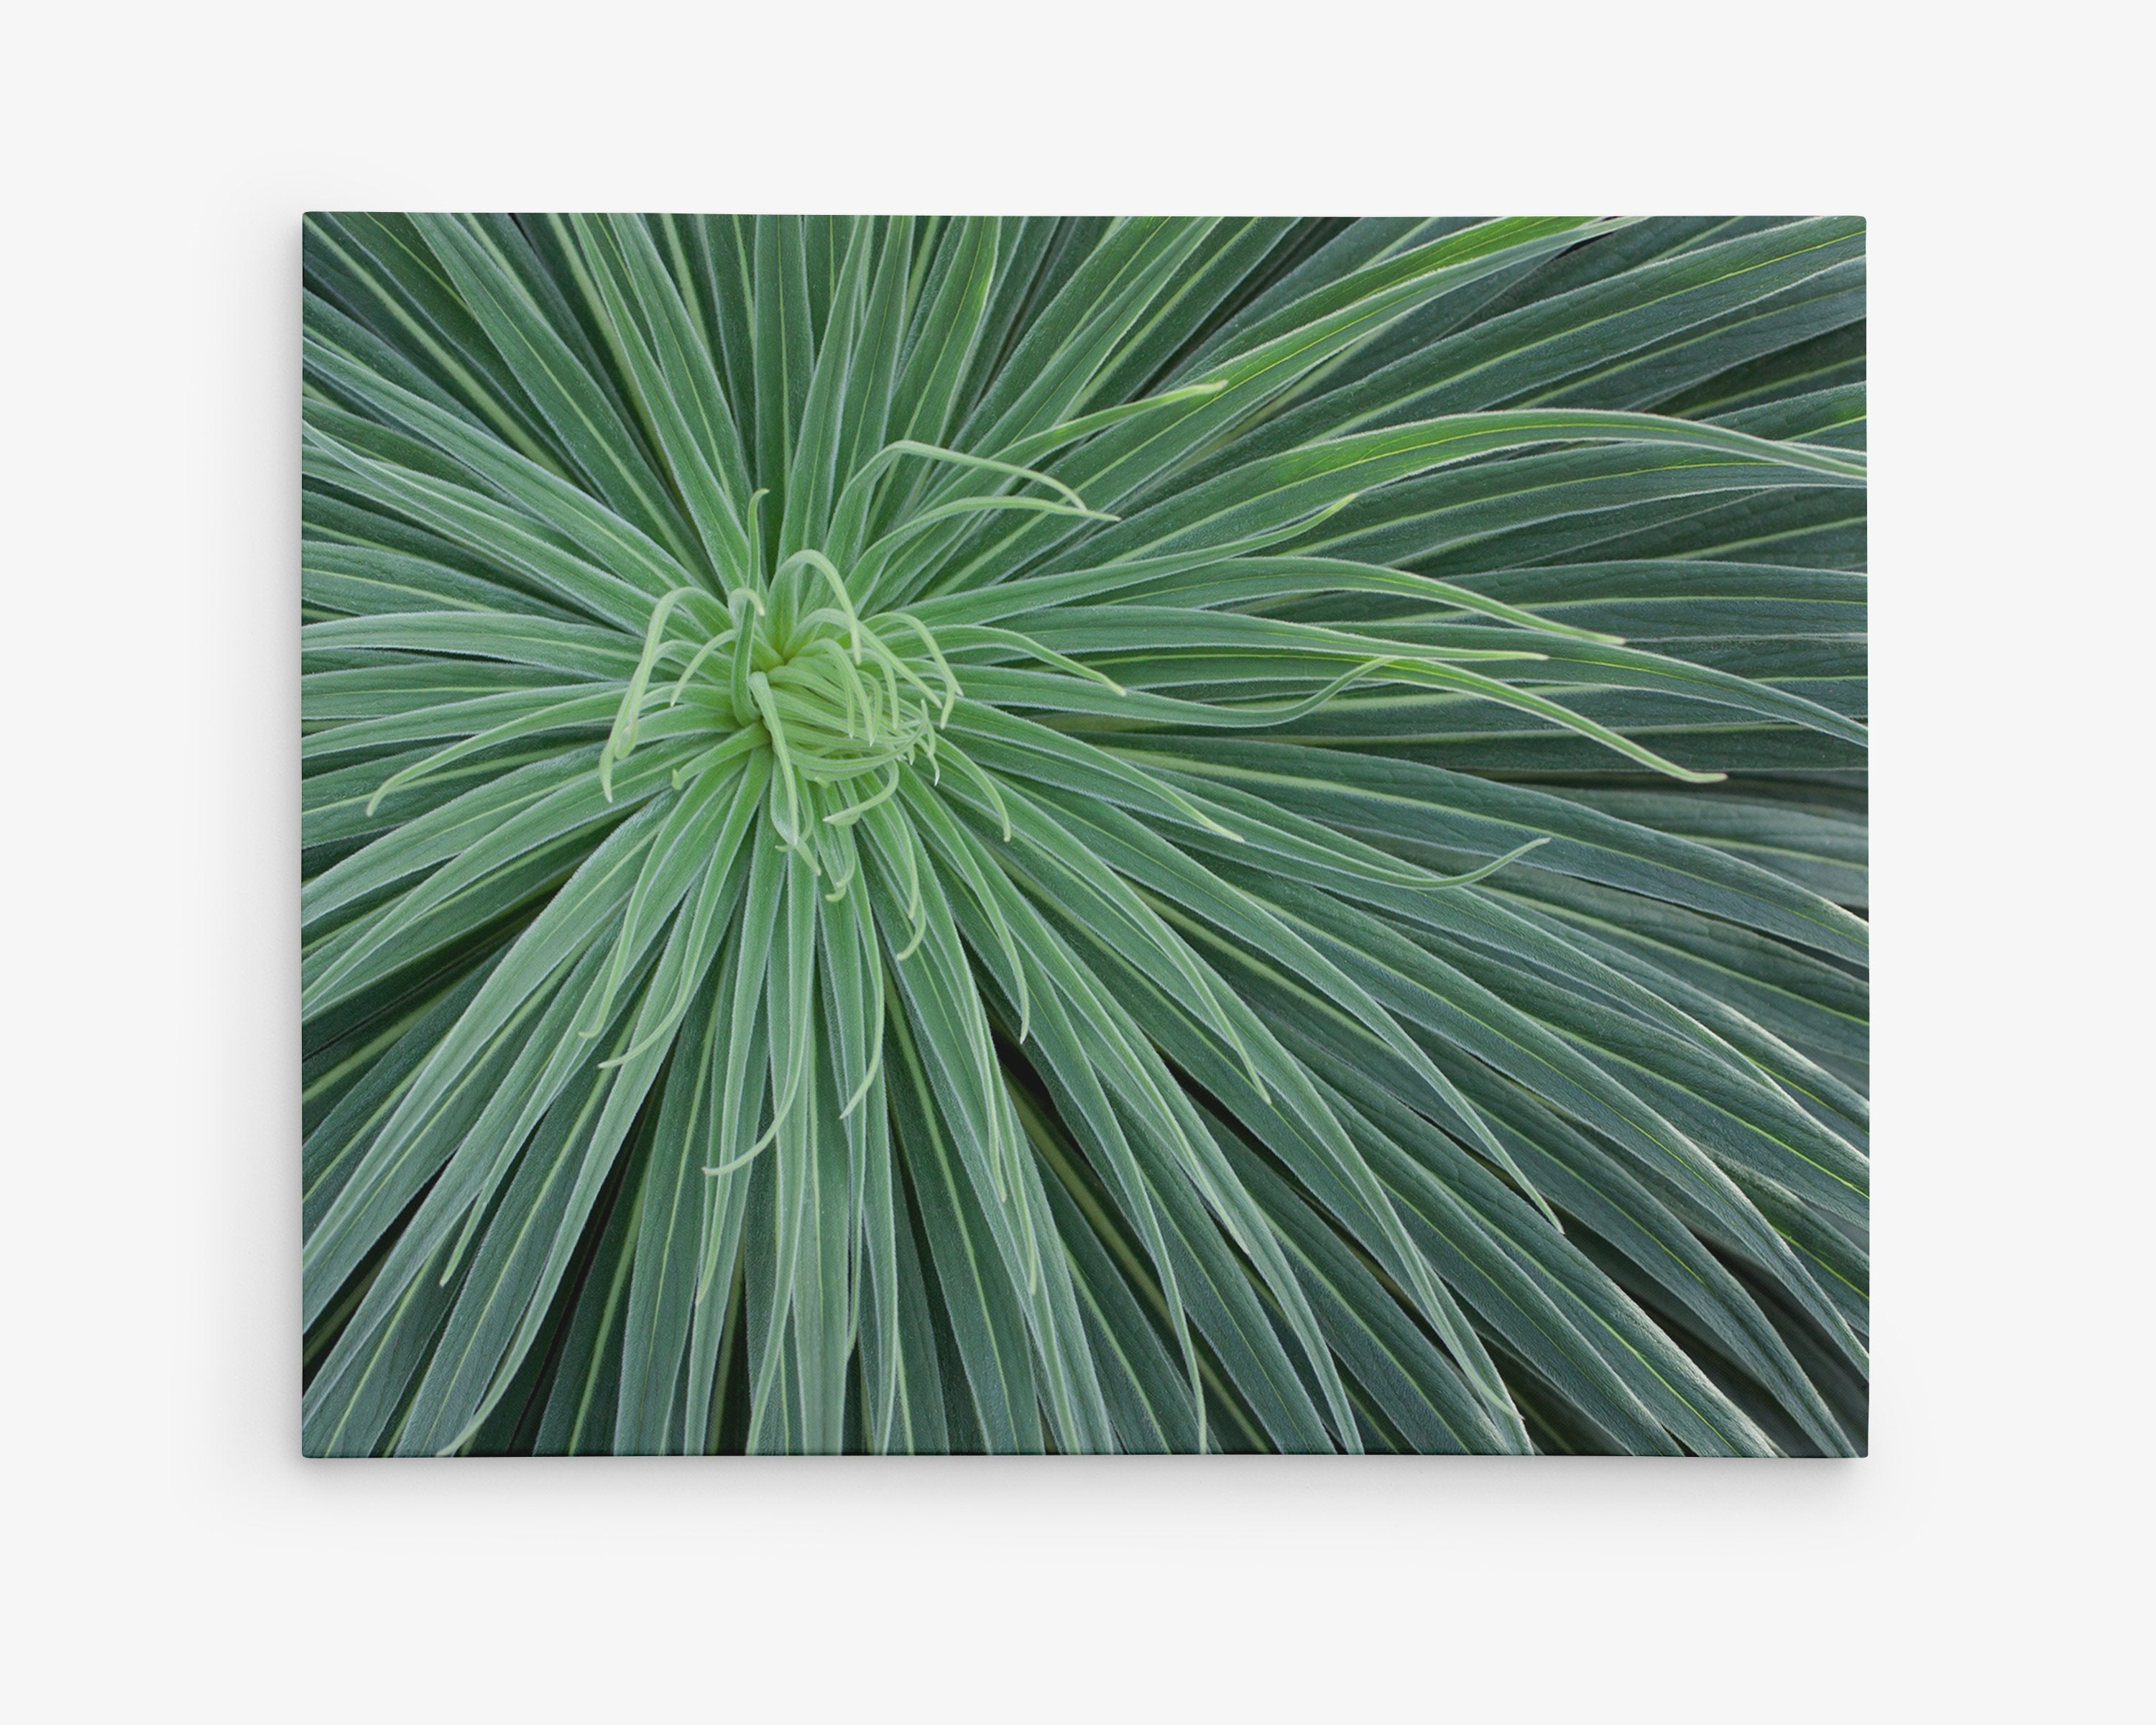 Close-up image of Offley Green&#39;s &#39;Desert Fireworks&#39; Abstract Green Botanical Canvas Wall Art, with long, thin, spiky leaves radiating from the center, showing detailed textures and natural patterns.